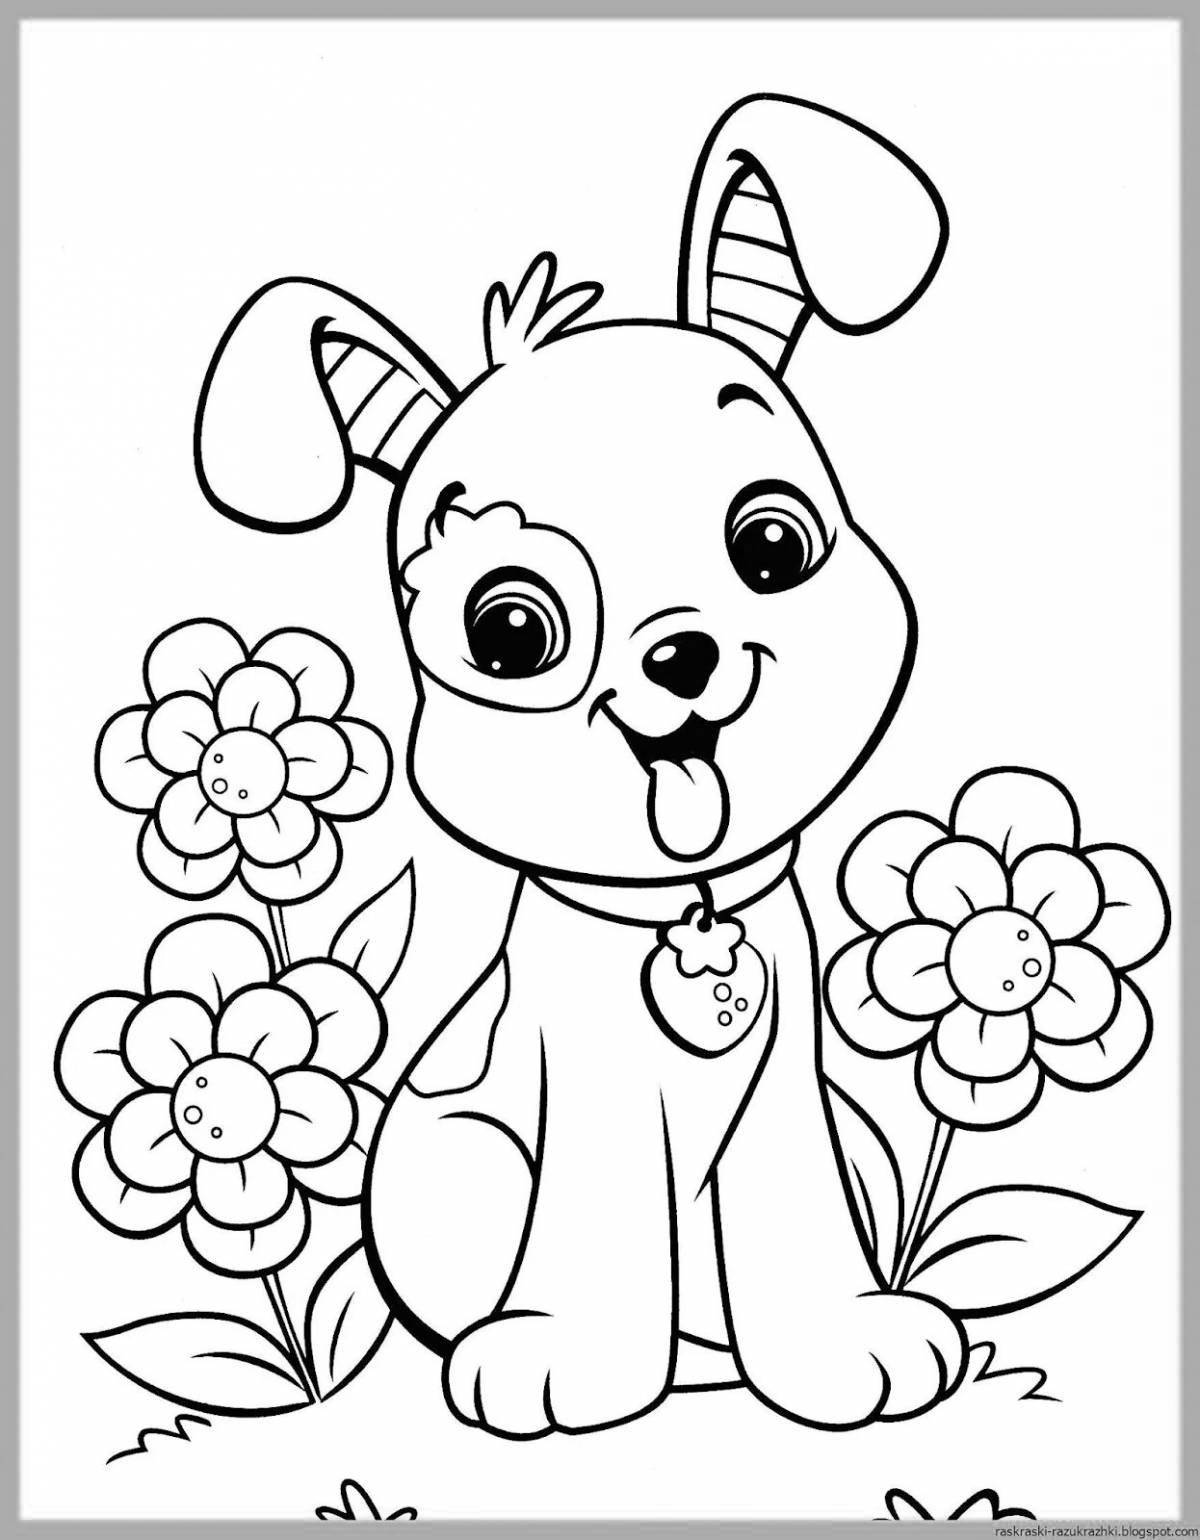 Coloring book brave dog